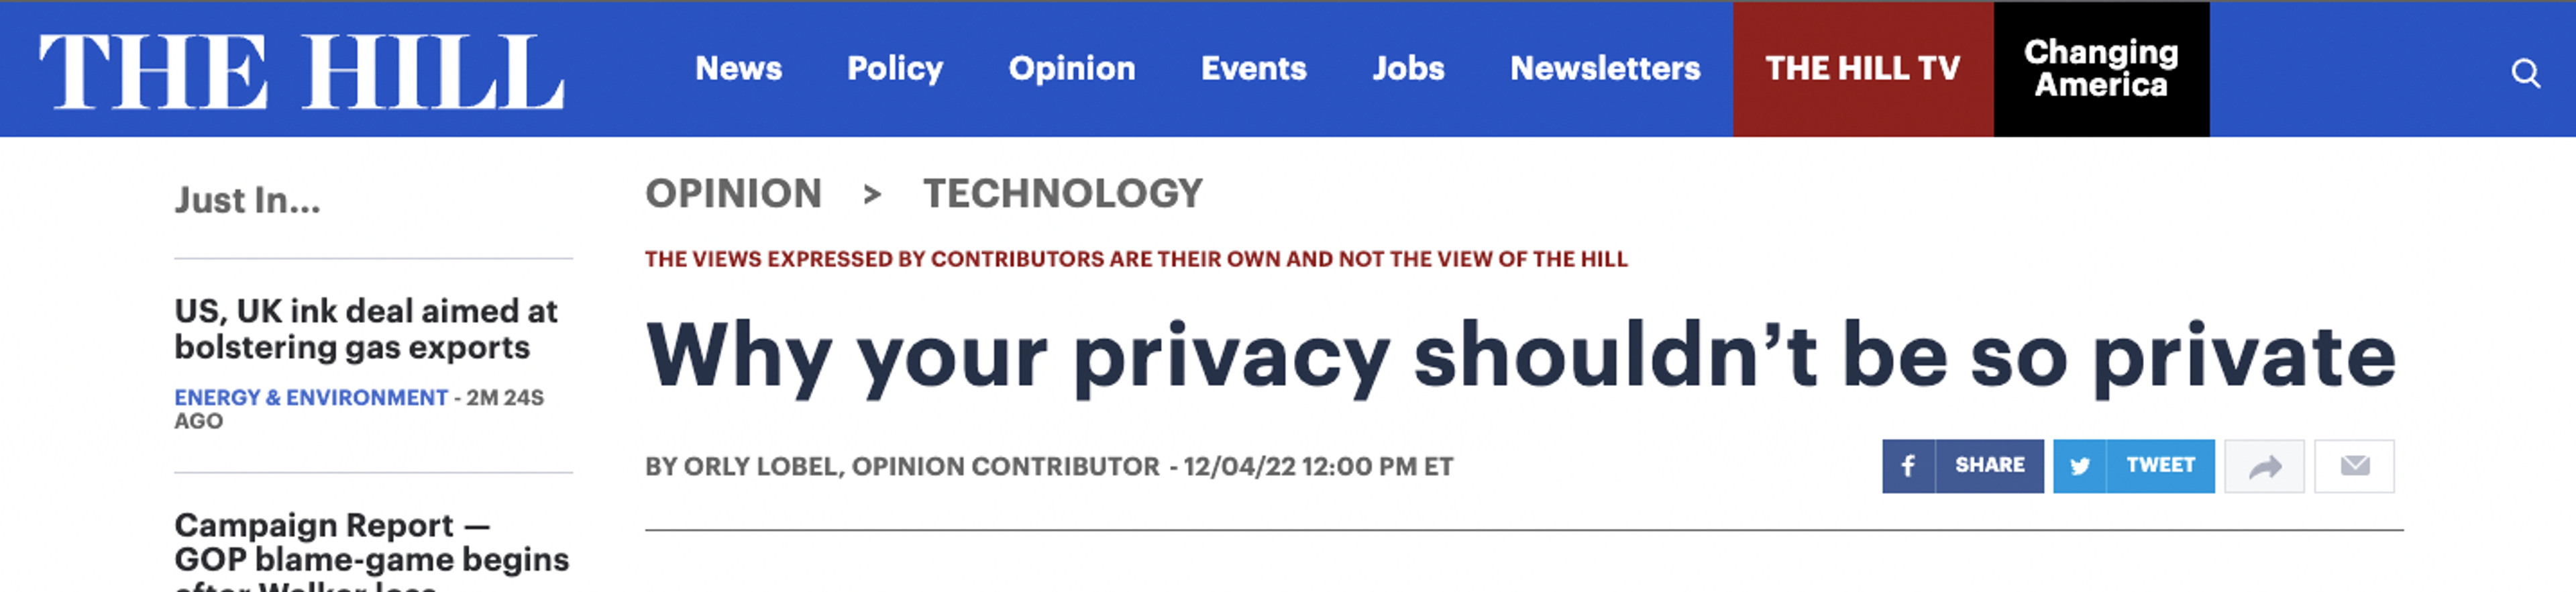 Article from the Hill on why your privacy should not be so private.